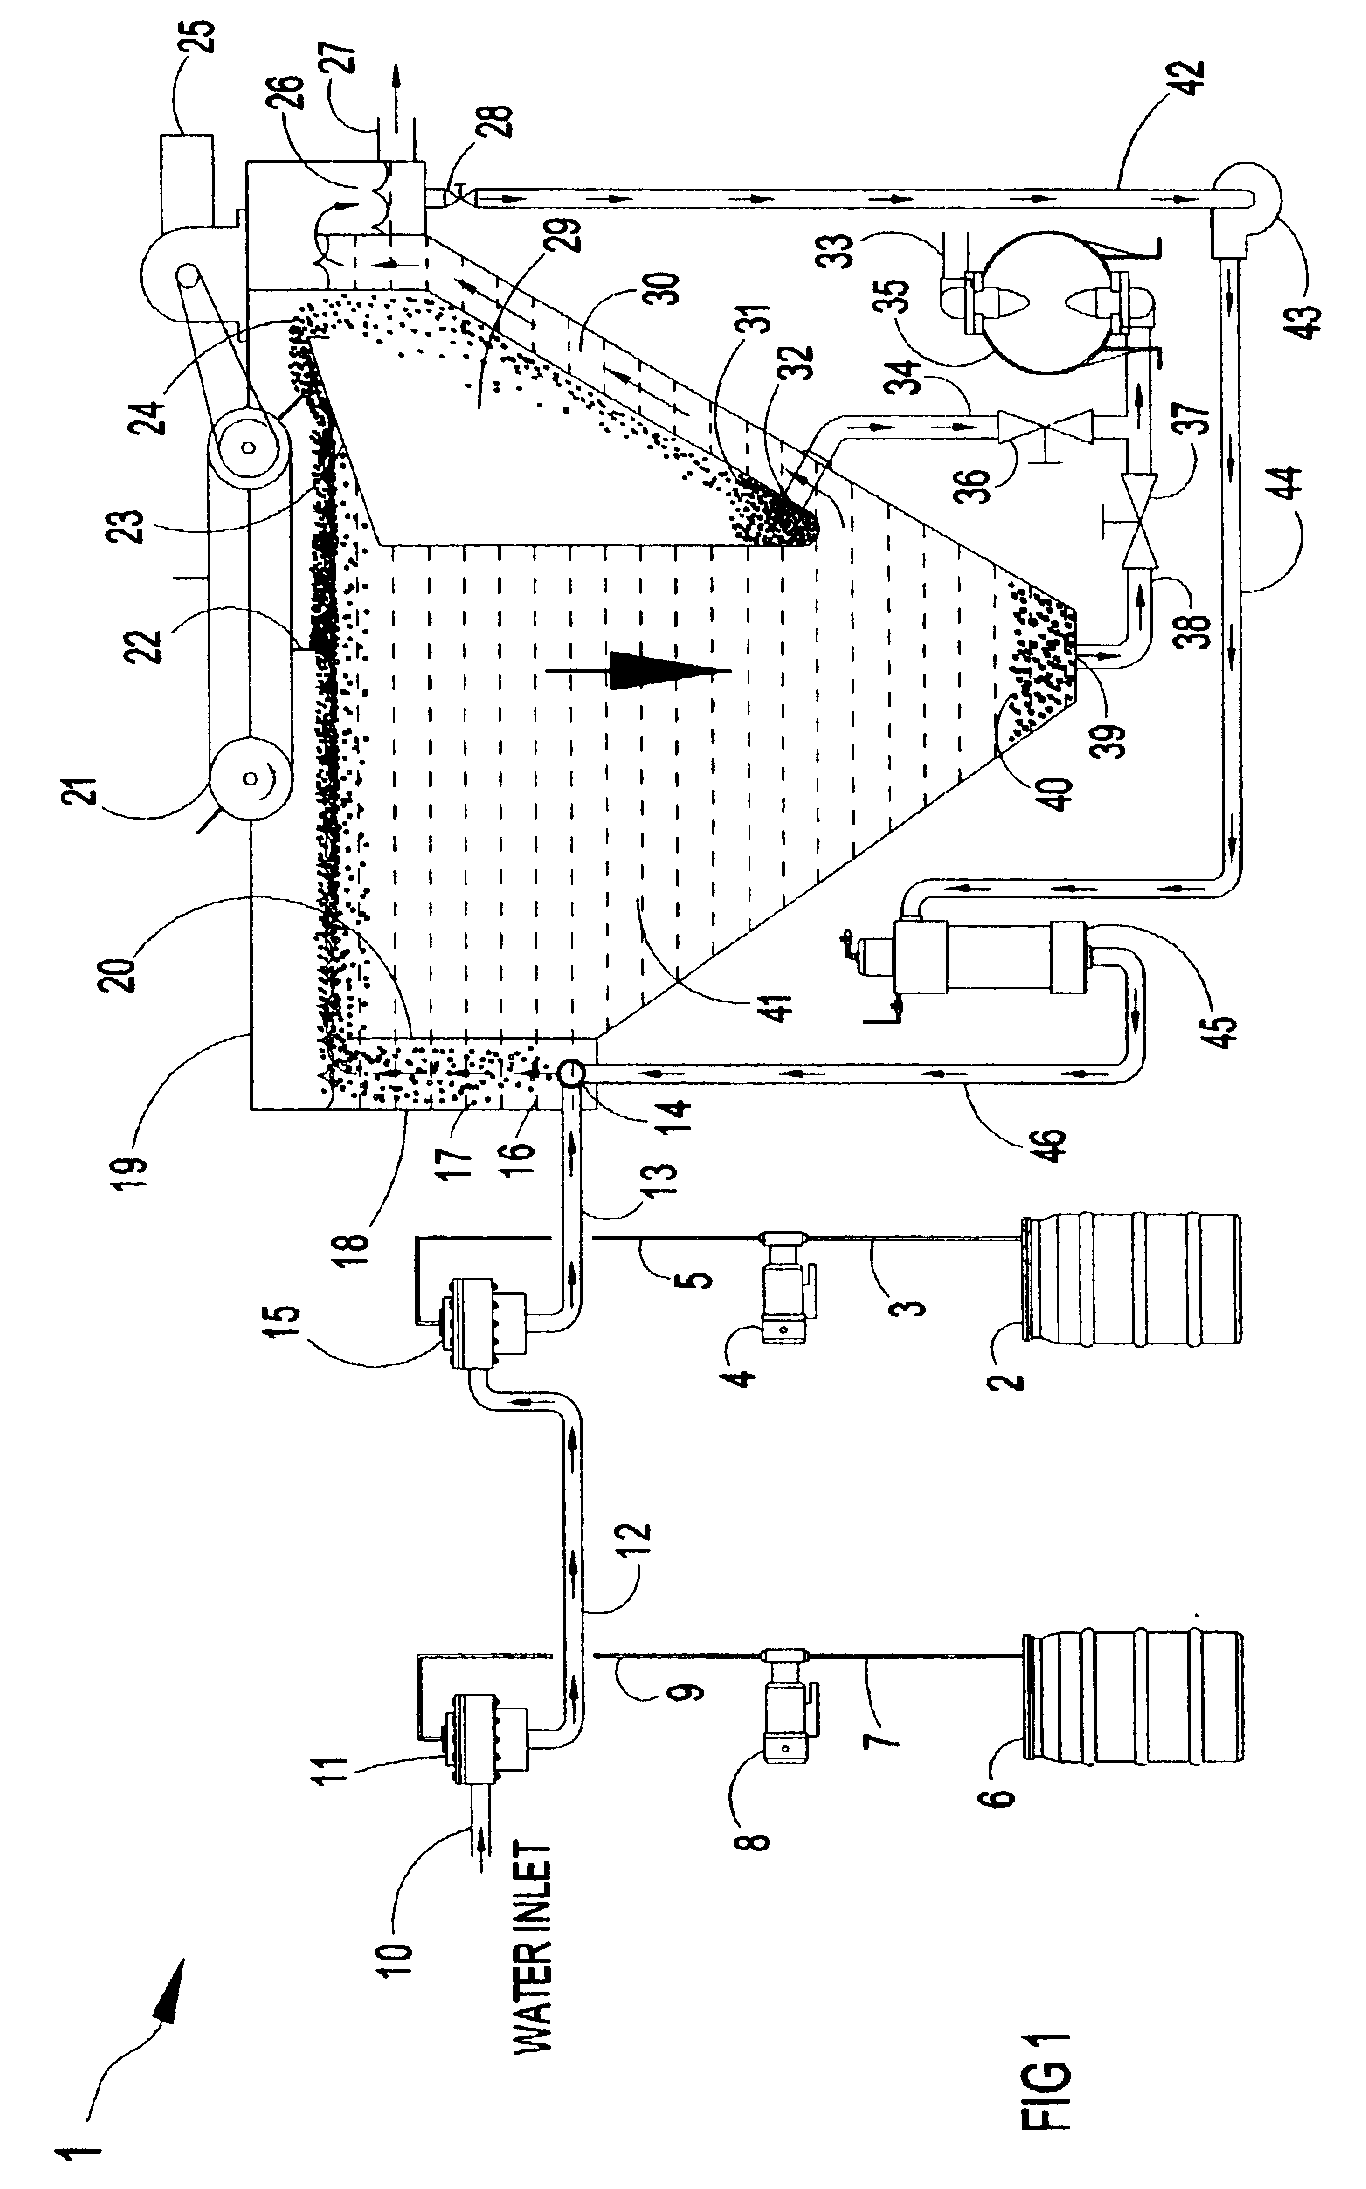 Apparatus for the separation of solids from liquids by dissolved gas floatation